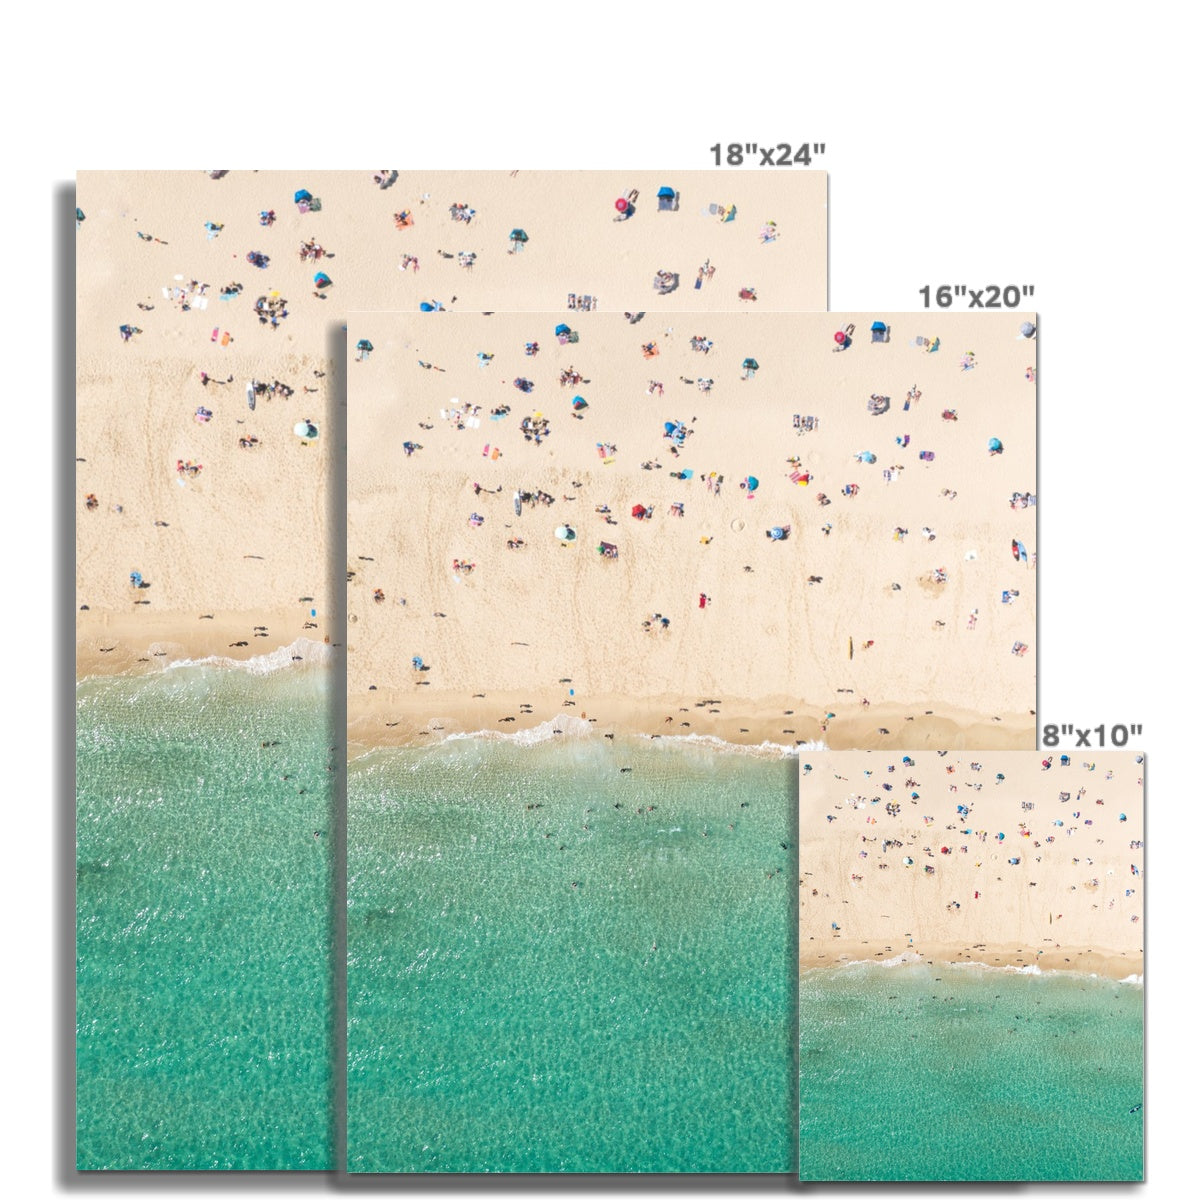 beachgoers picture sizes